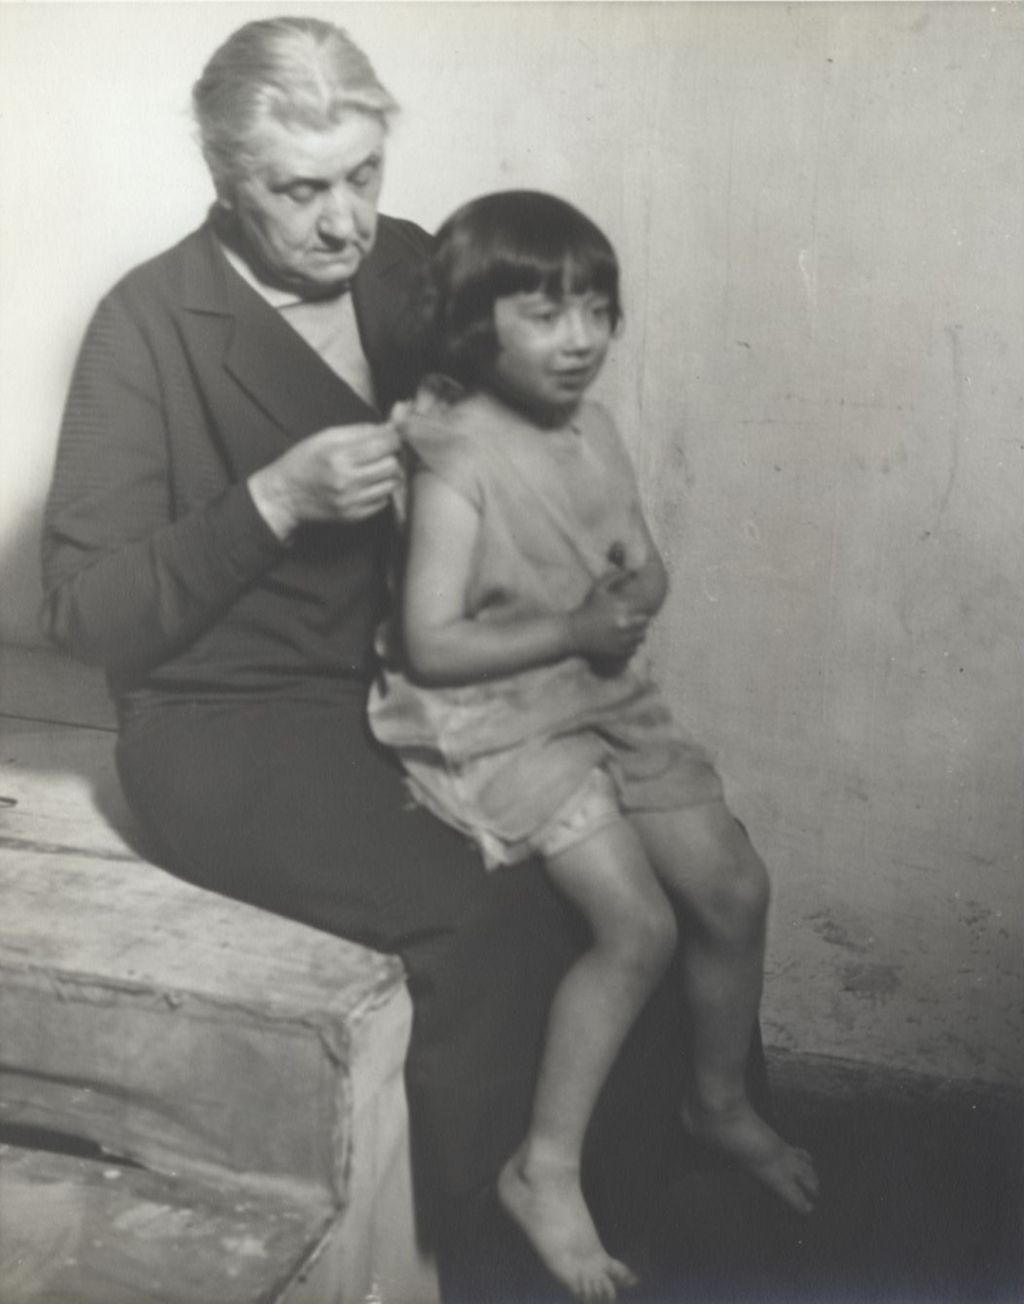 Miniature of Jane Addams with Theater Child Seated on Her Lap